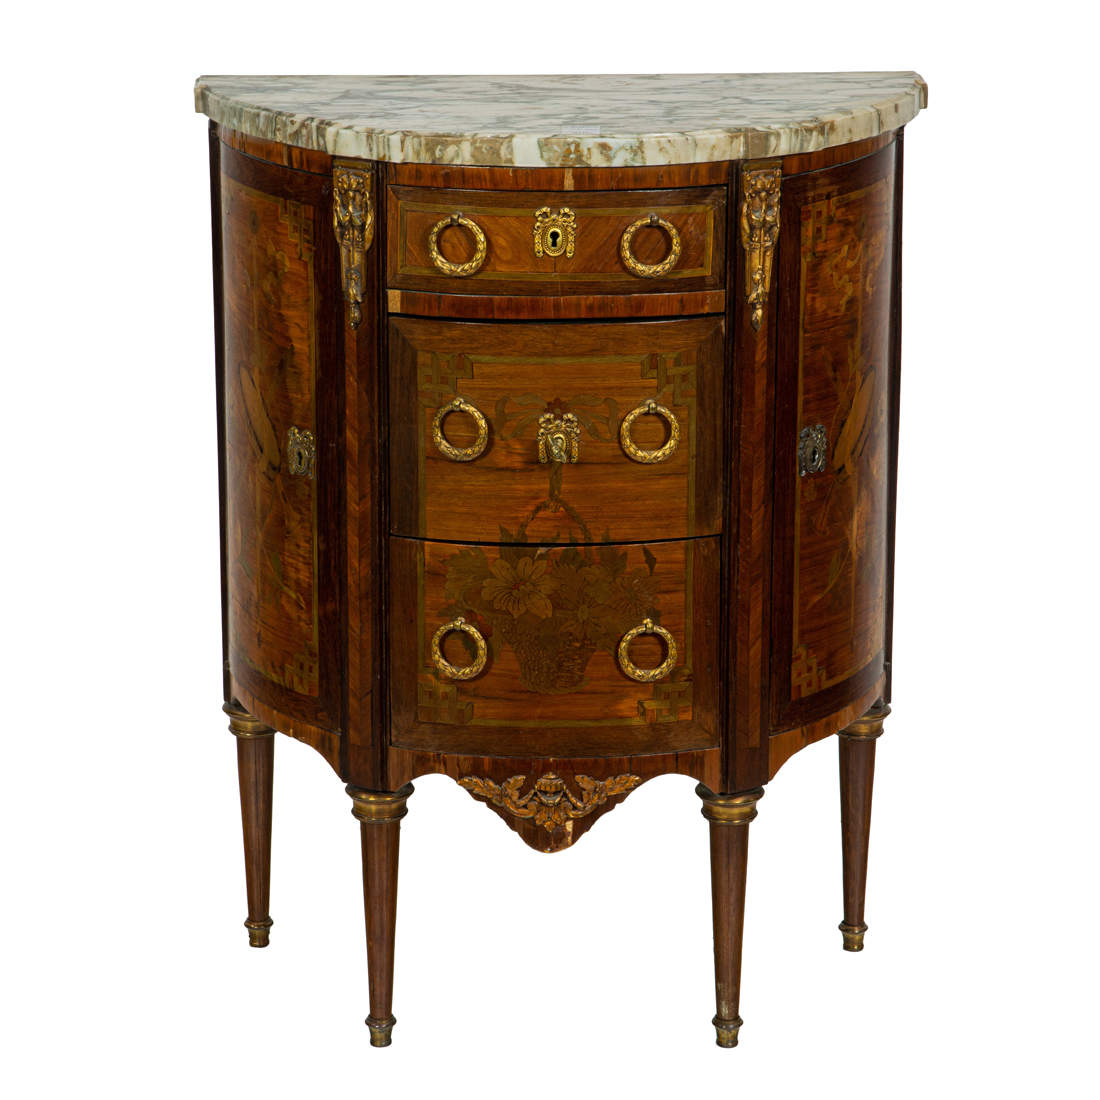 A LOUIS XV STYLE DEMILUNE INLAID